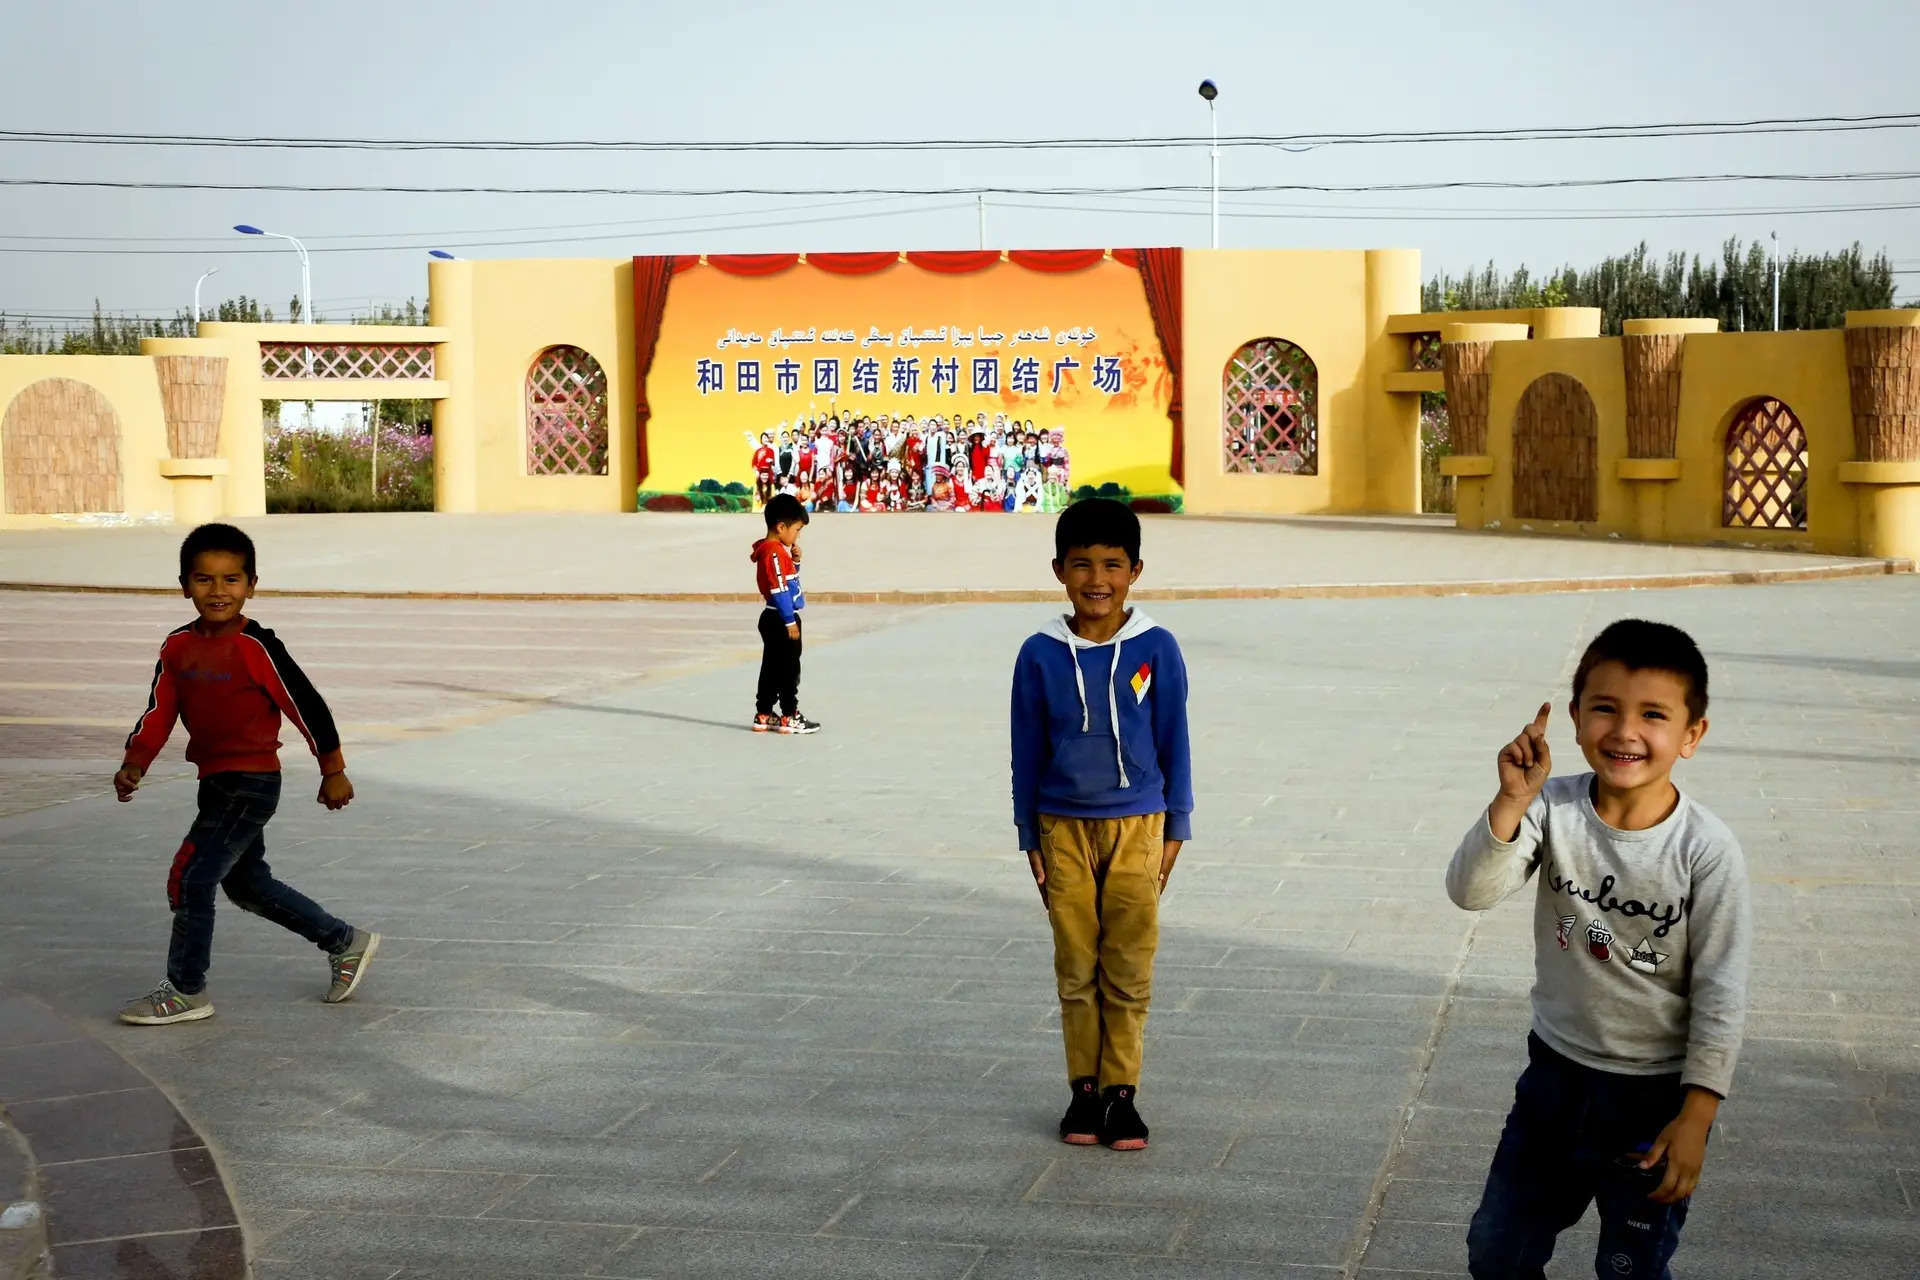 File photo: Uyghur children play at a square in Xinjiang region. China has been systematically replacing the names of villages inhabited by Uyghurs and other ethnic minorities to reflect the ruling Communist Party's ideology.